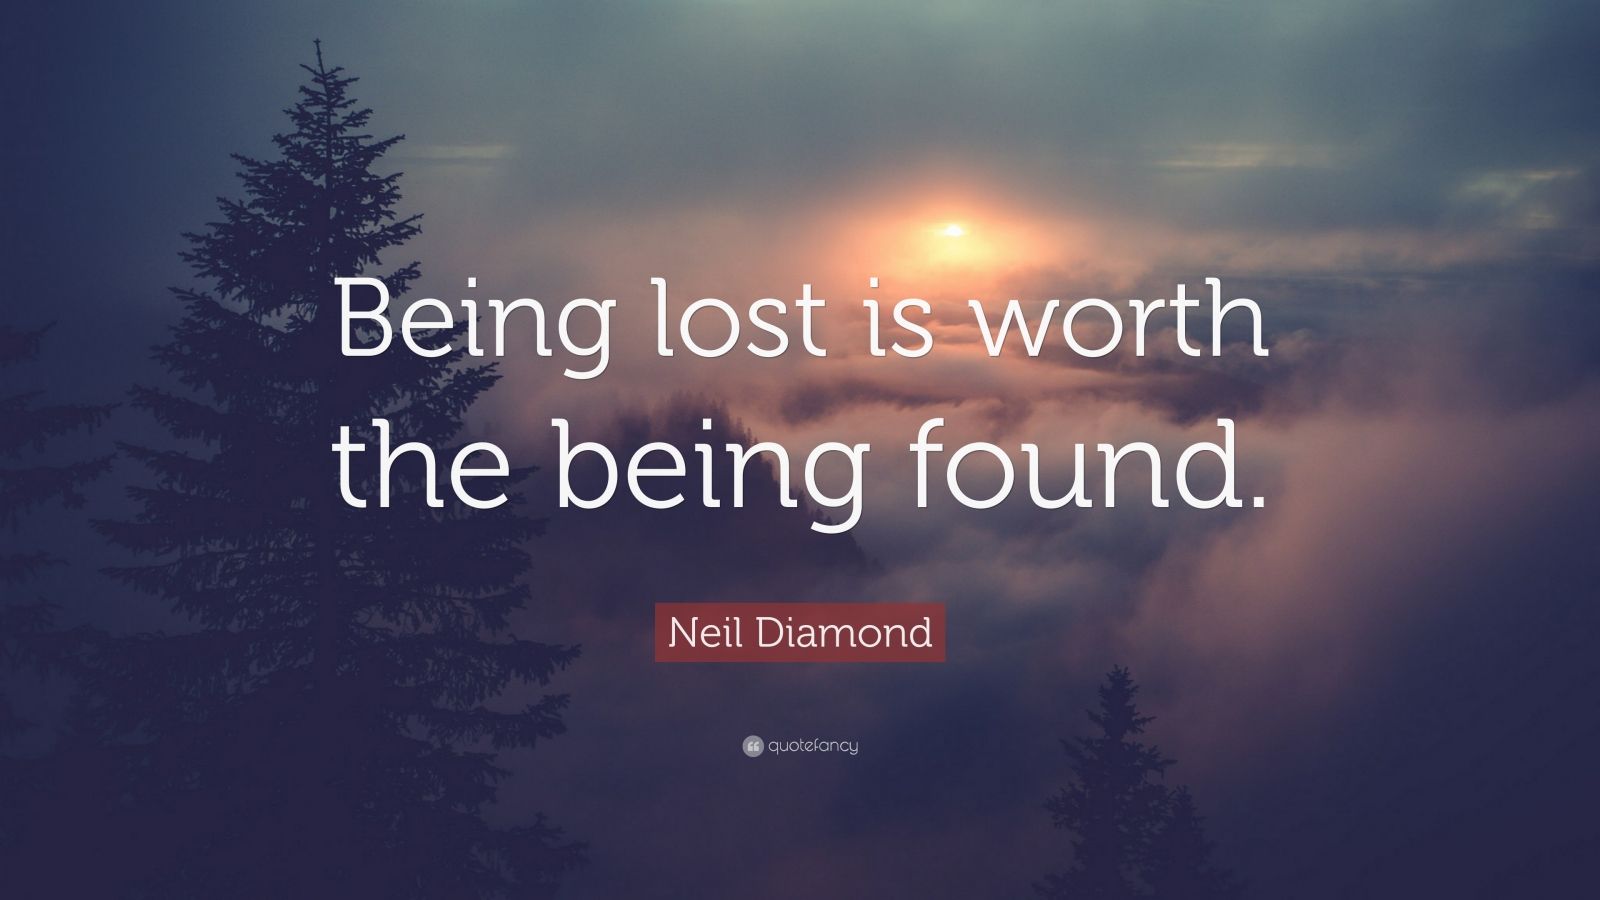 Neil Diamond Quote: “Being lost is worth the being found.” (7 ...